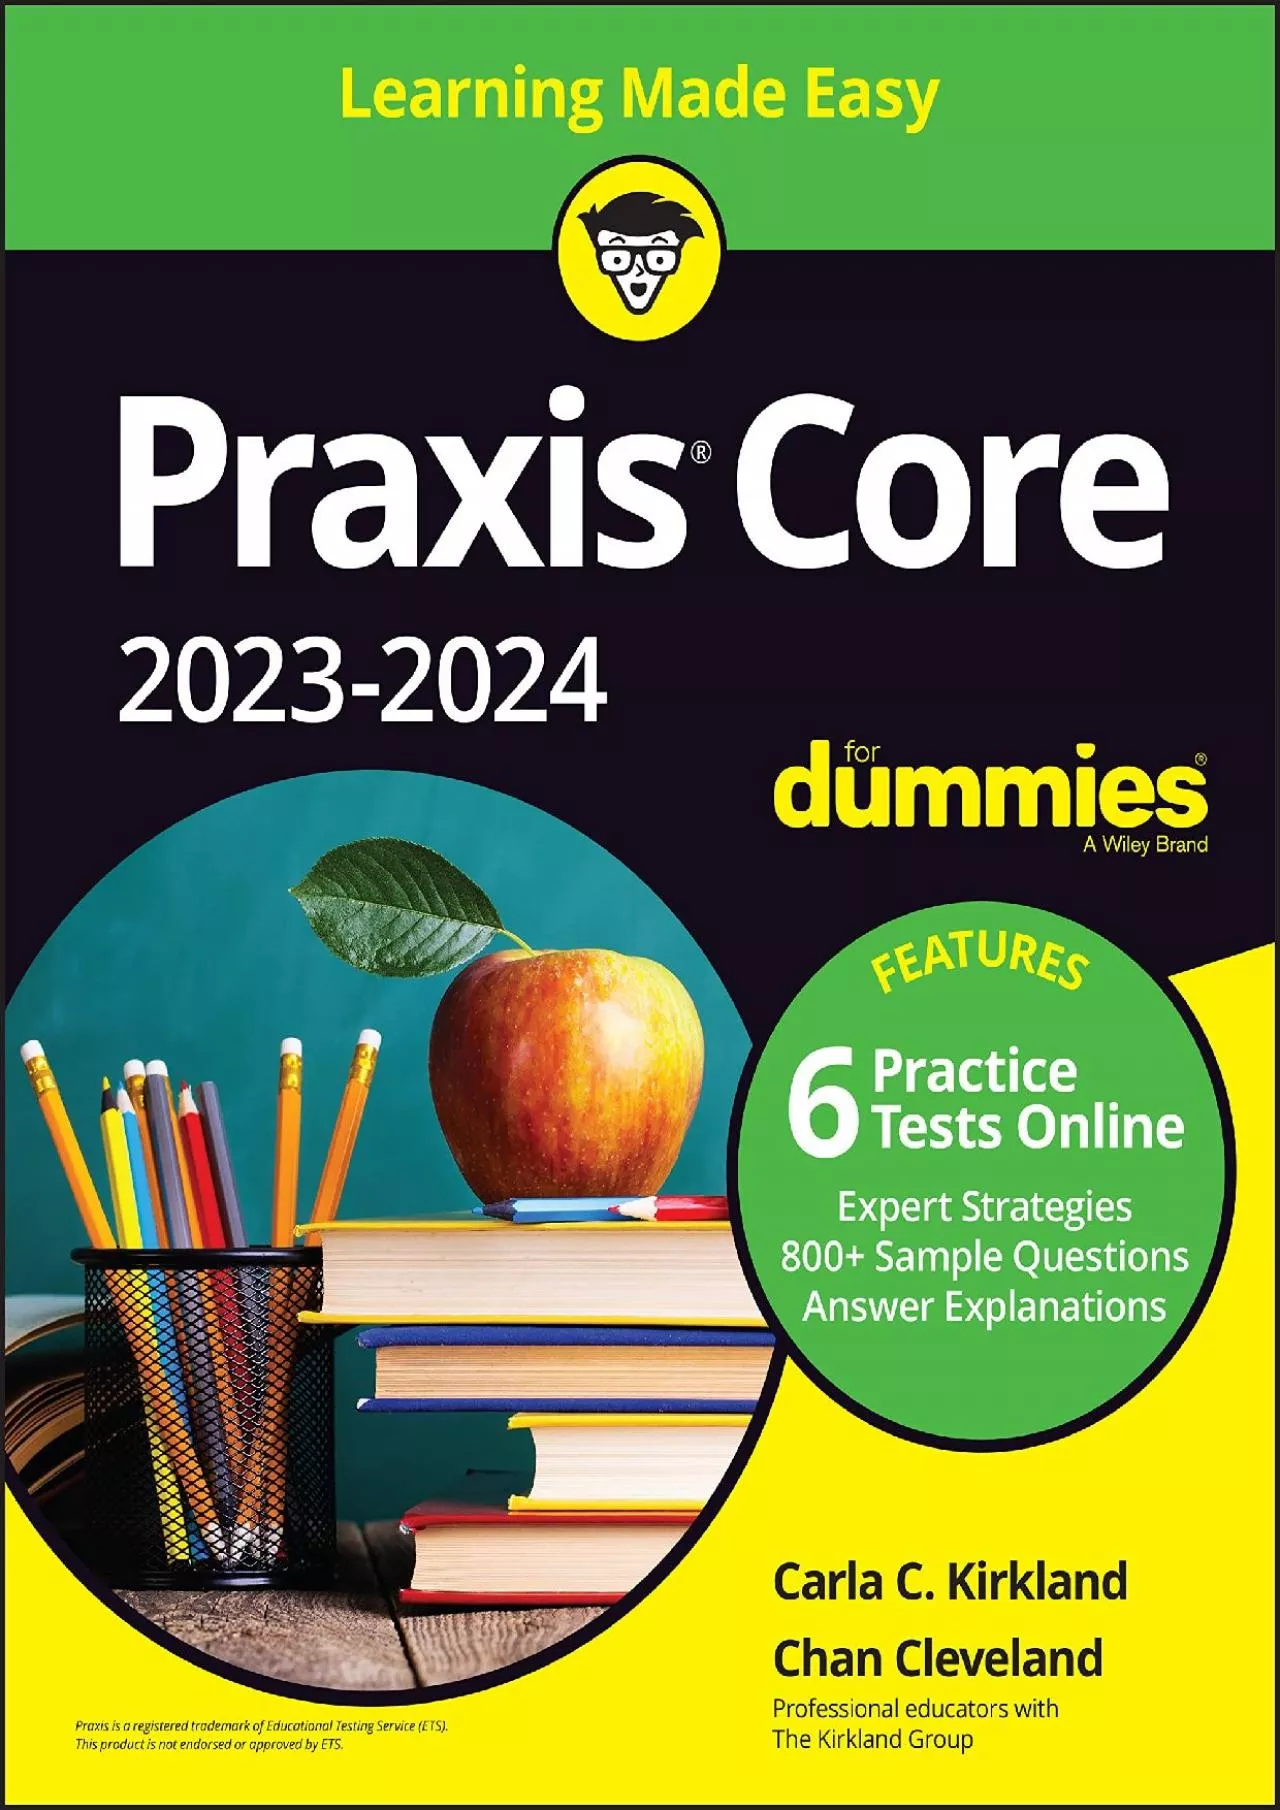 [EBOOK] Praxis Core 2023-2024 For Dummies